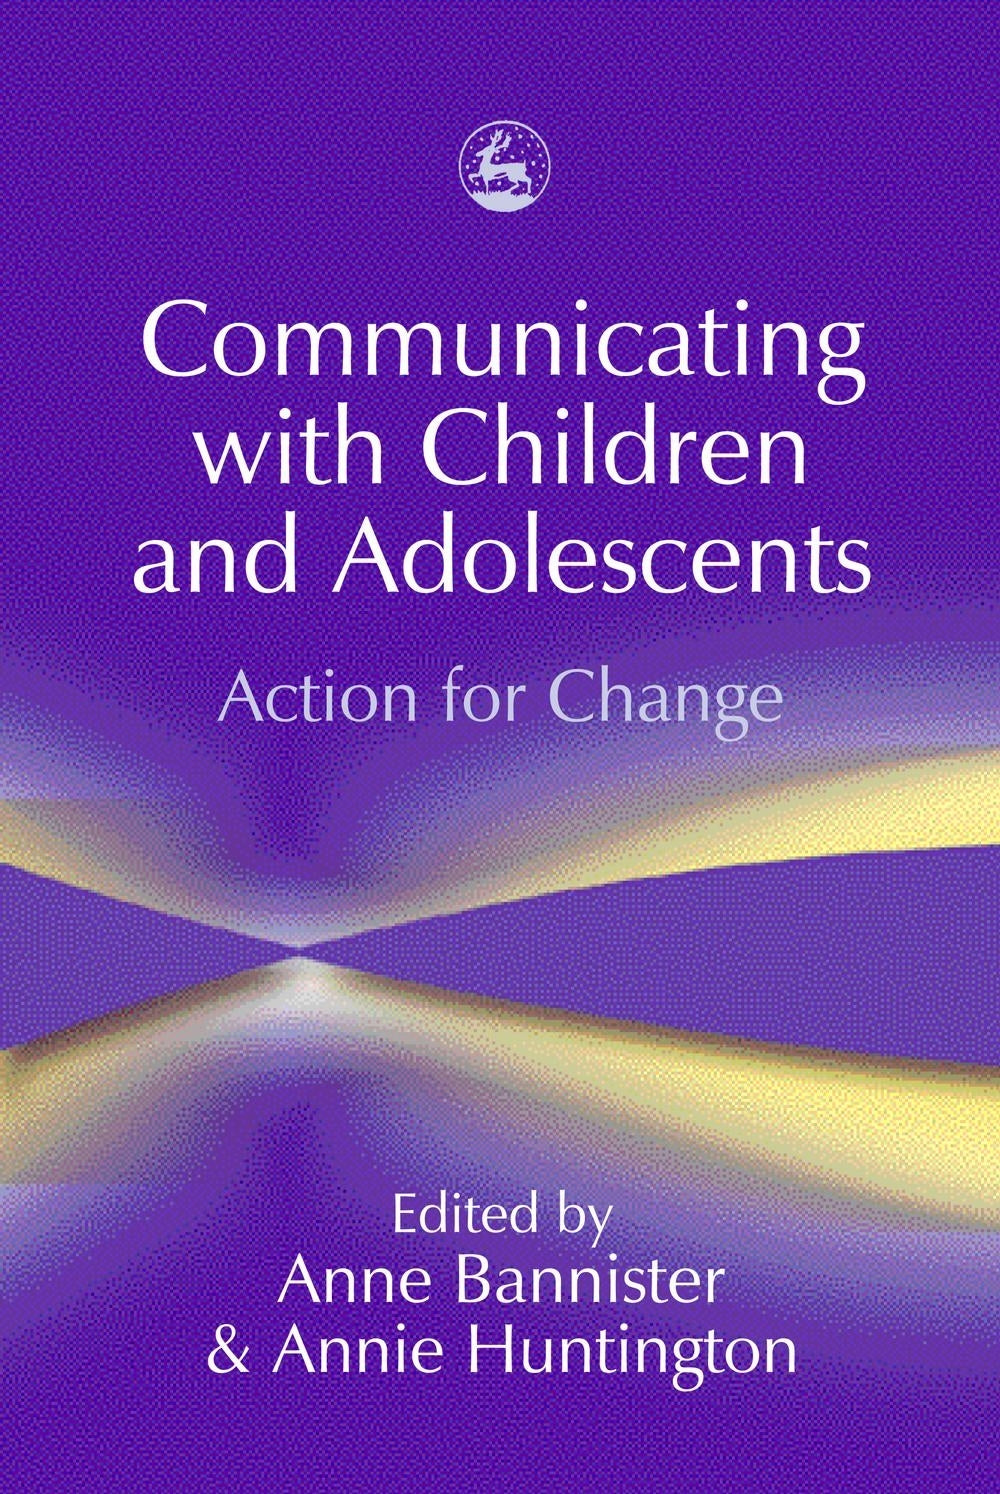 Communicating with Children and Adolescents by Anne Bannister, Annie Huntington, No Author Listed